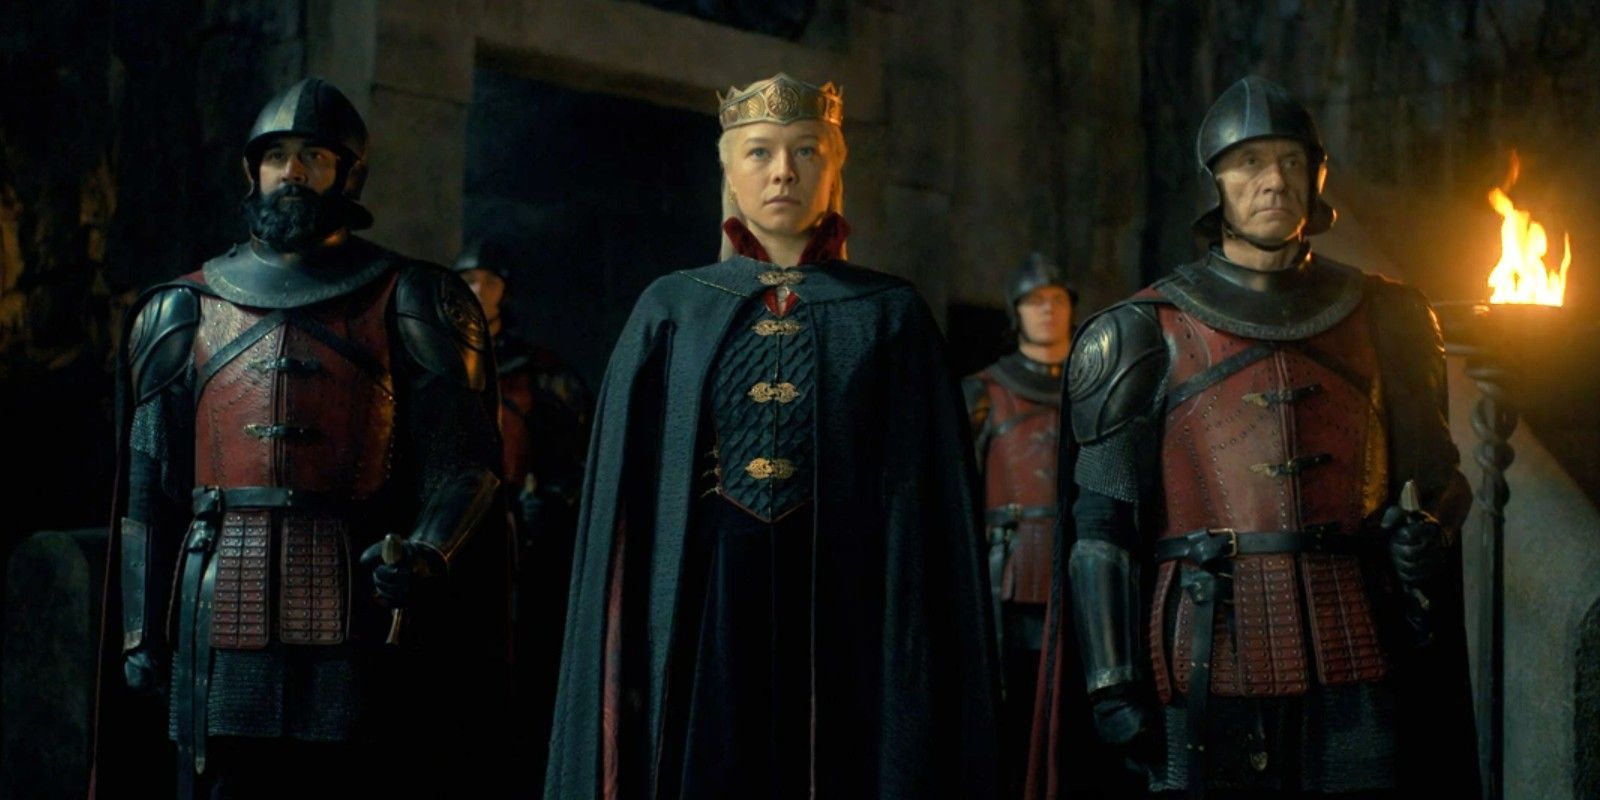 Queen Rhaenyra is pursued by guards in the dragon's house